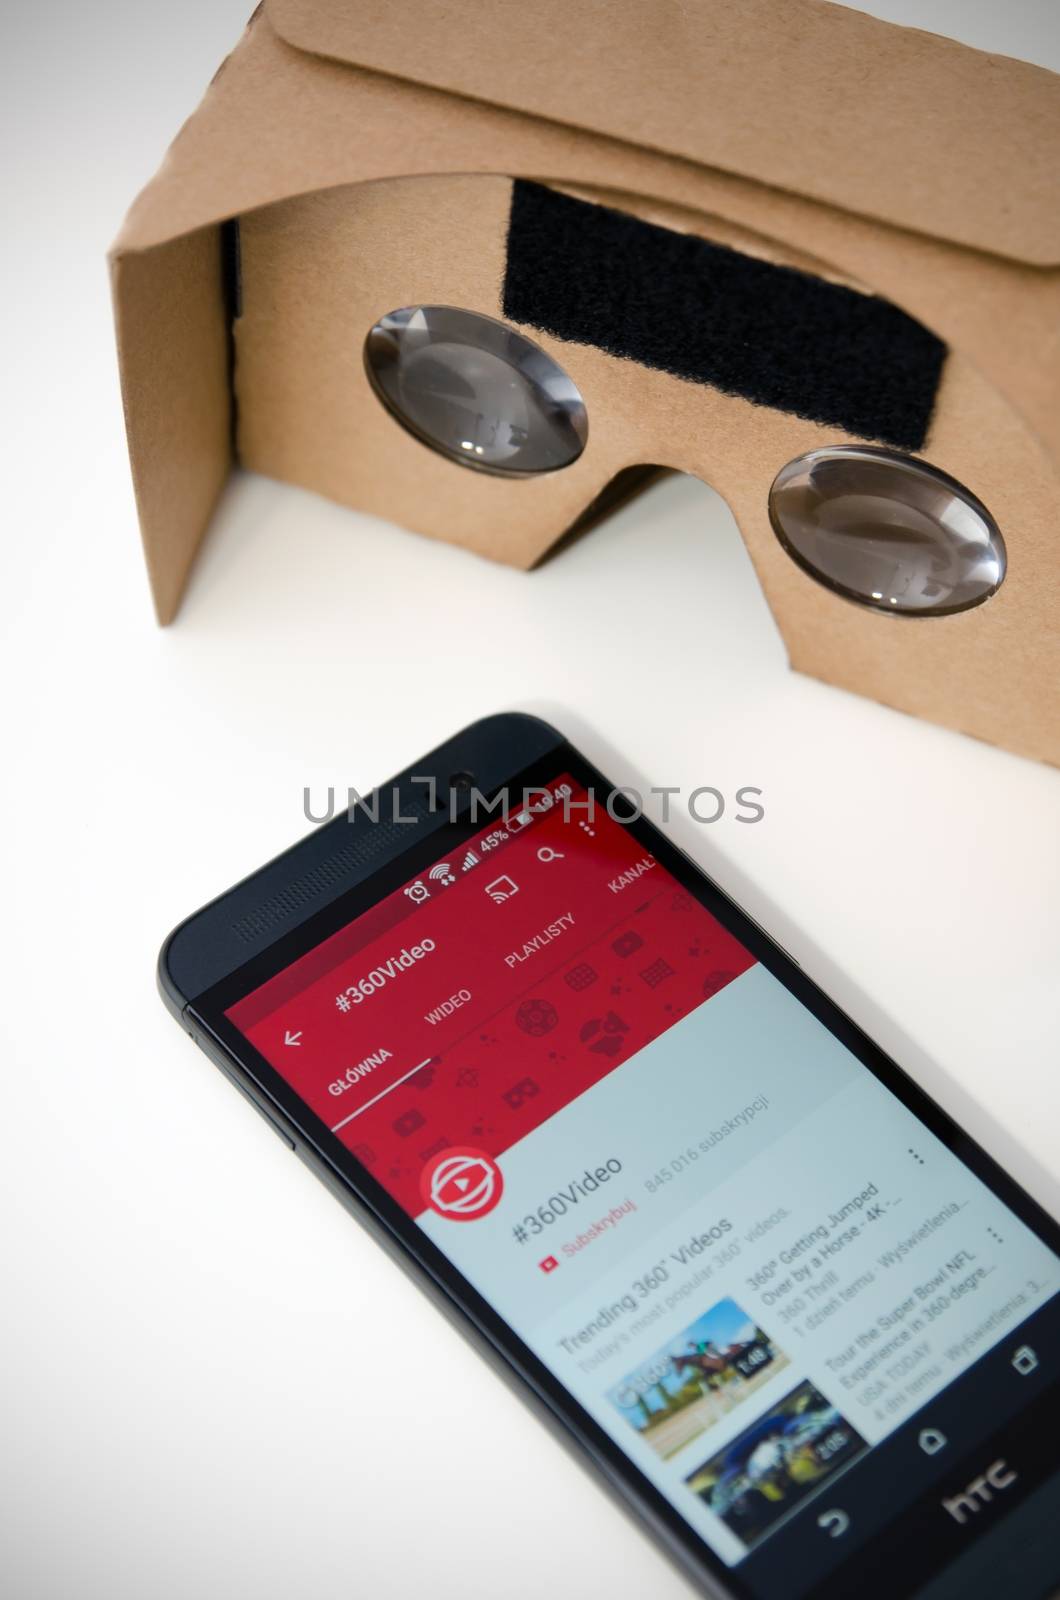 Google cardboard is easy way to watch movies in 3D